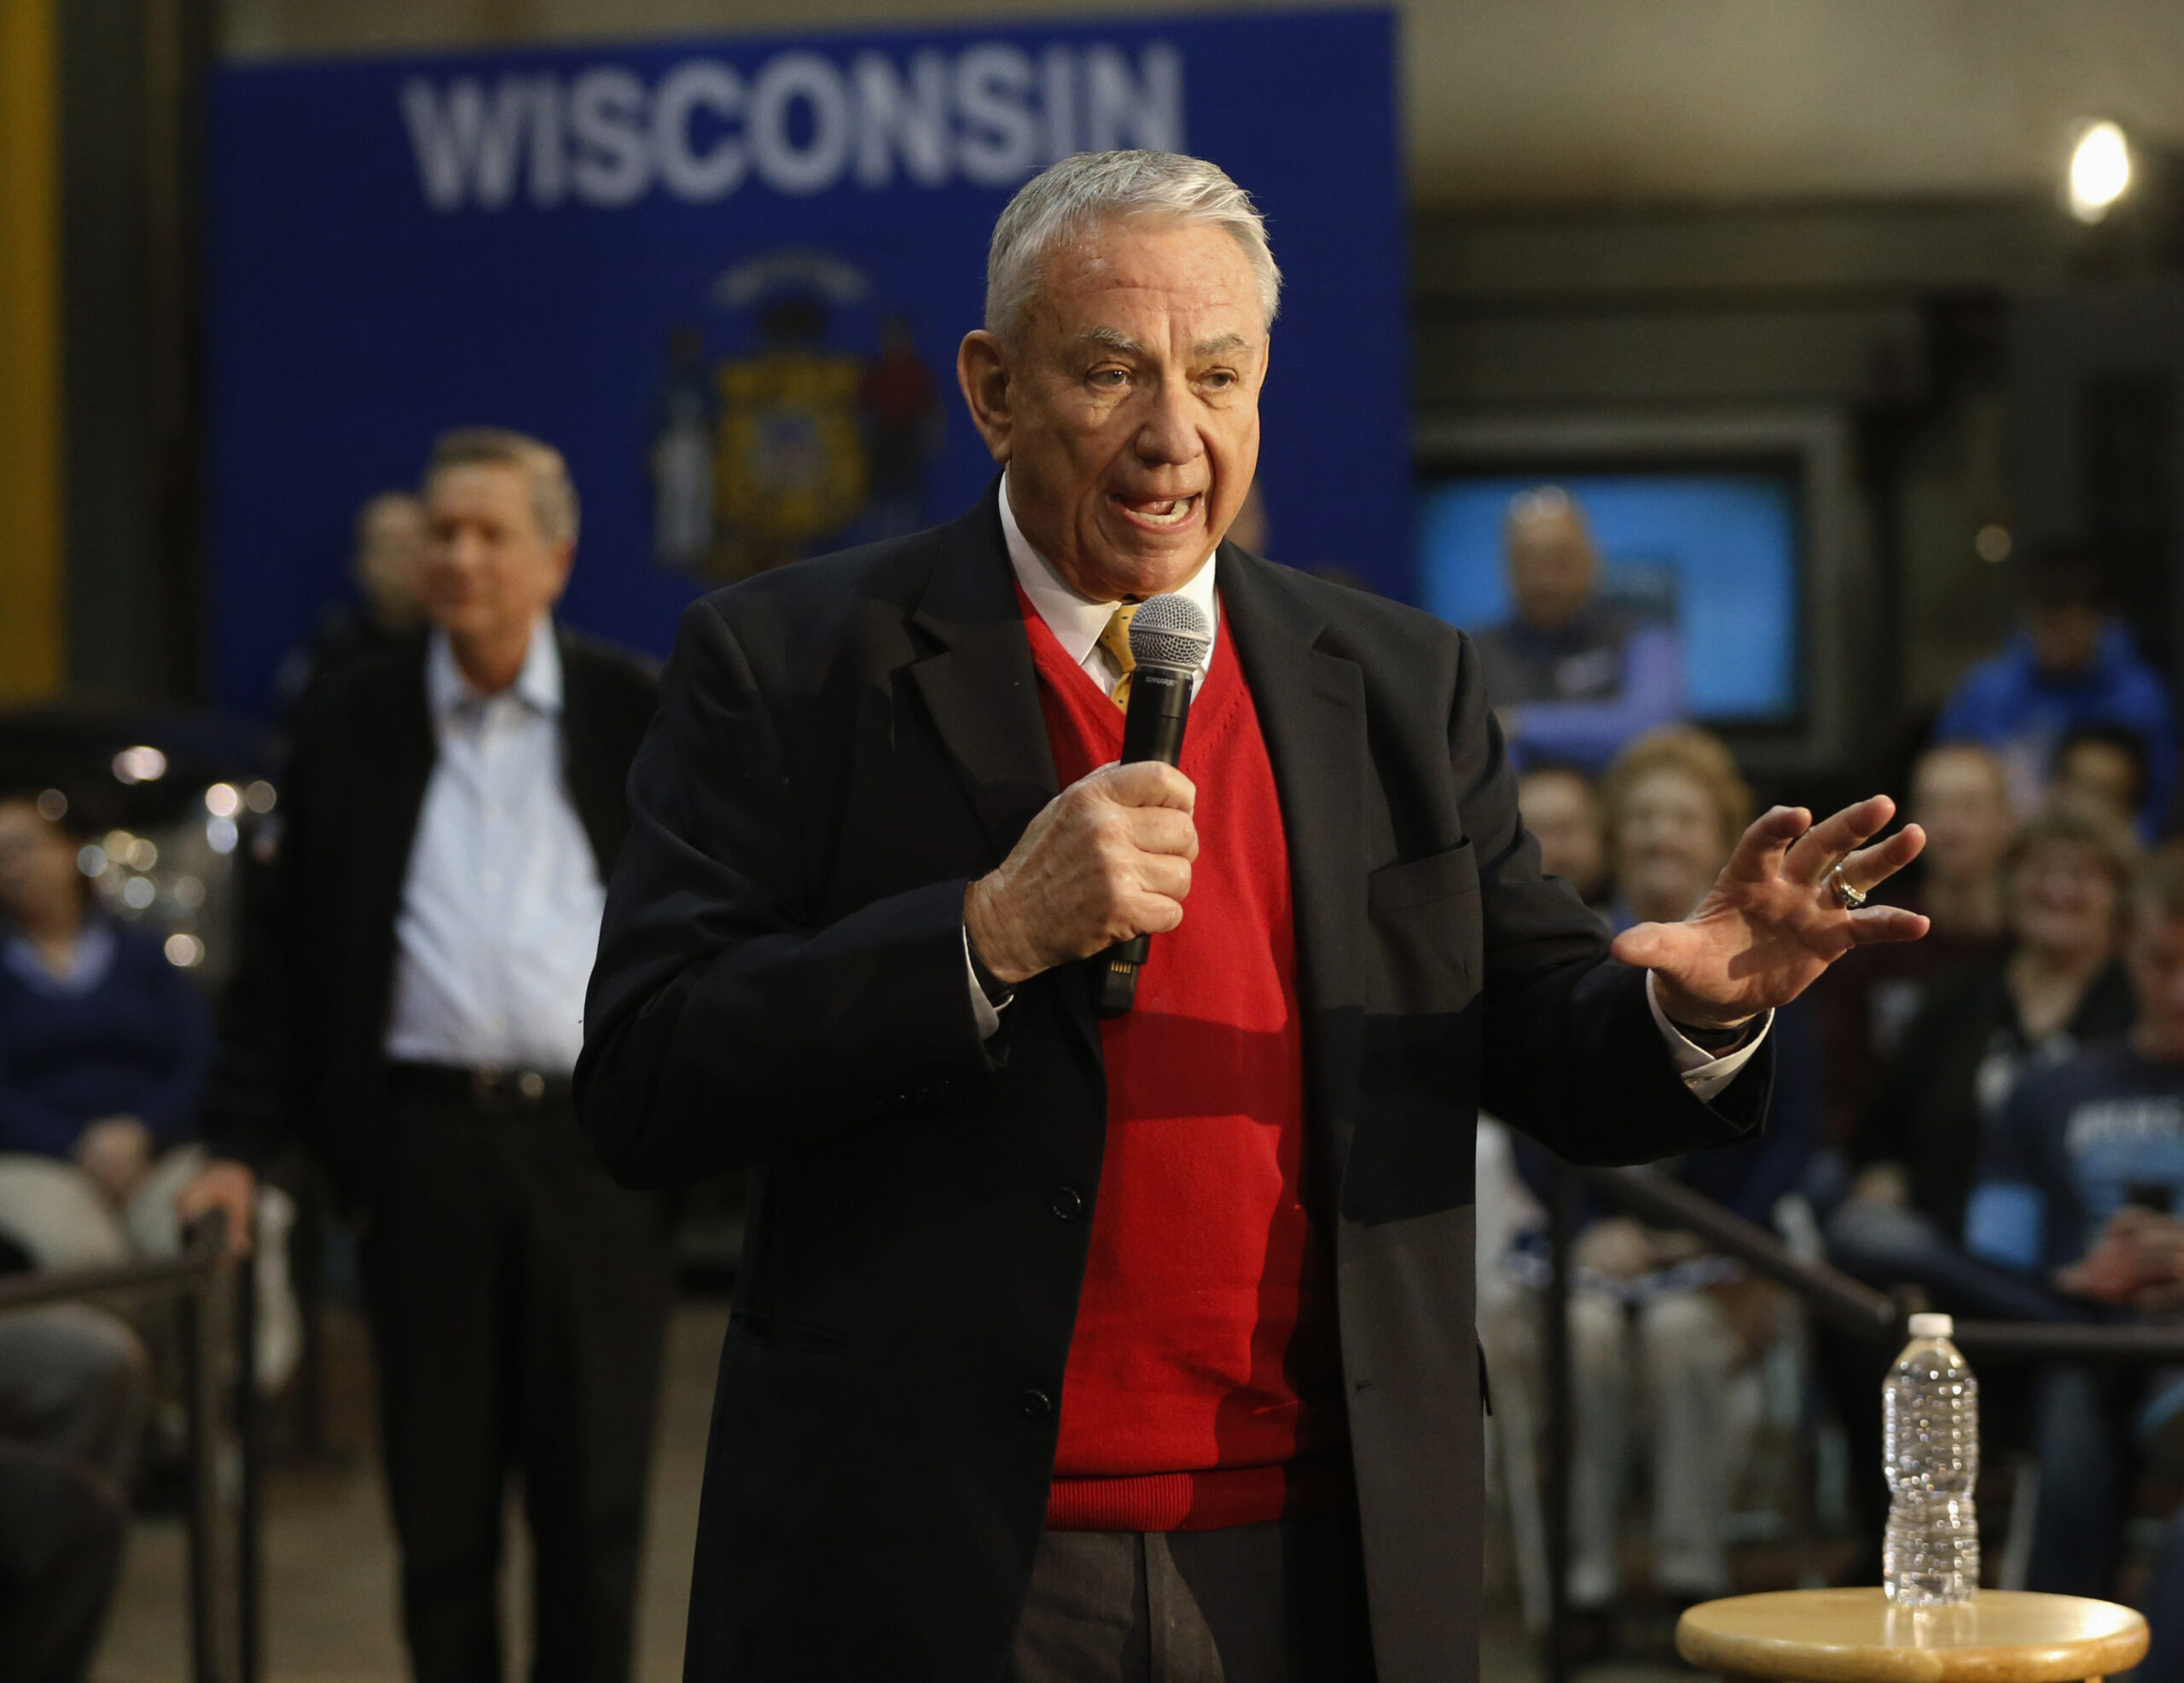 Tommy Thompson won’t run for Wisconsin governor in 2022